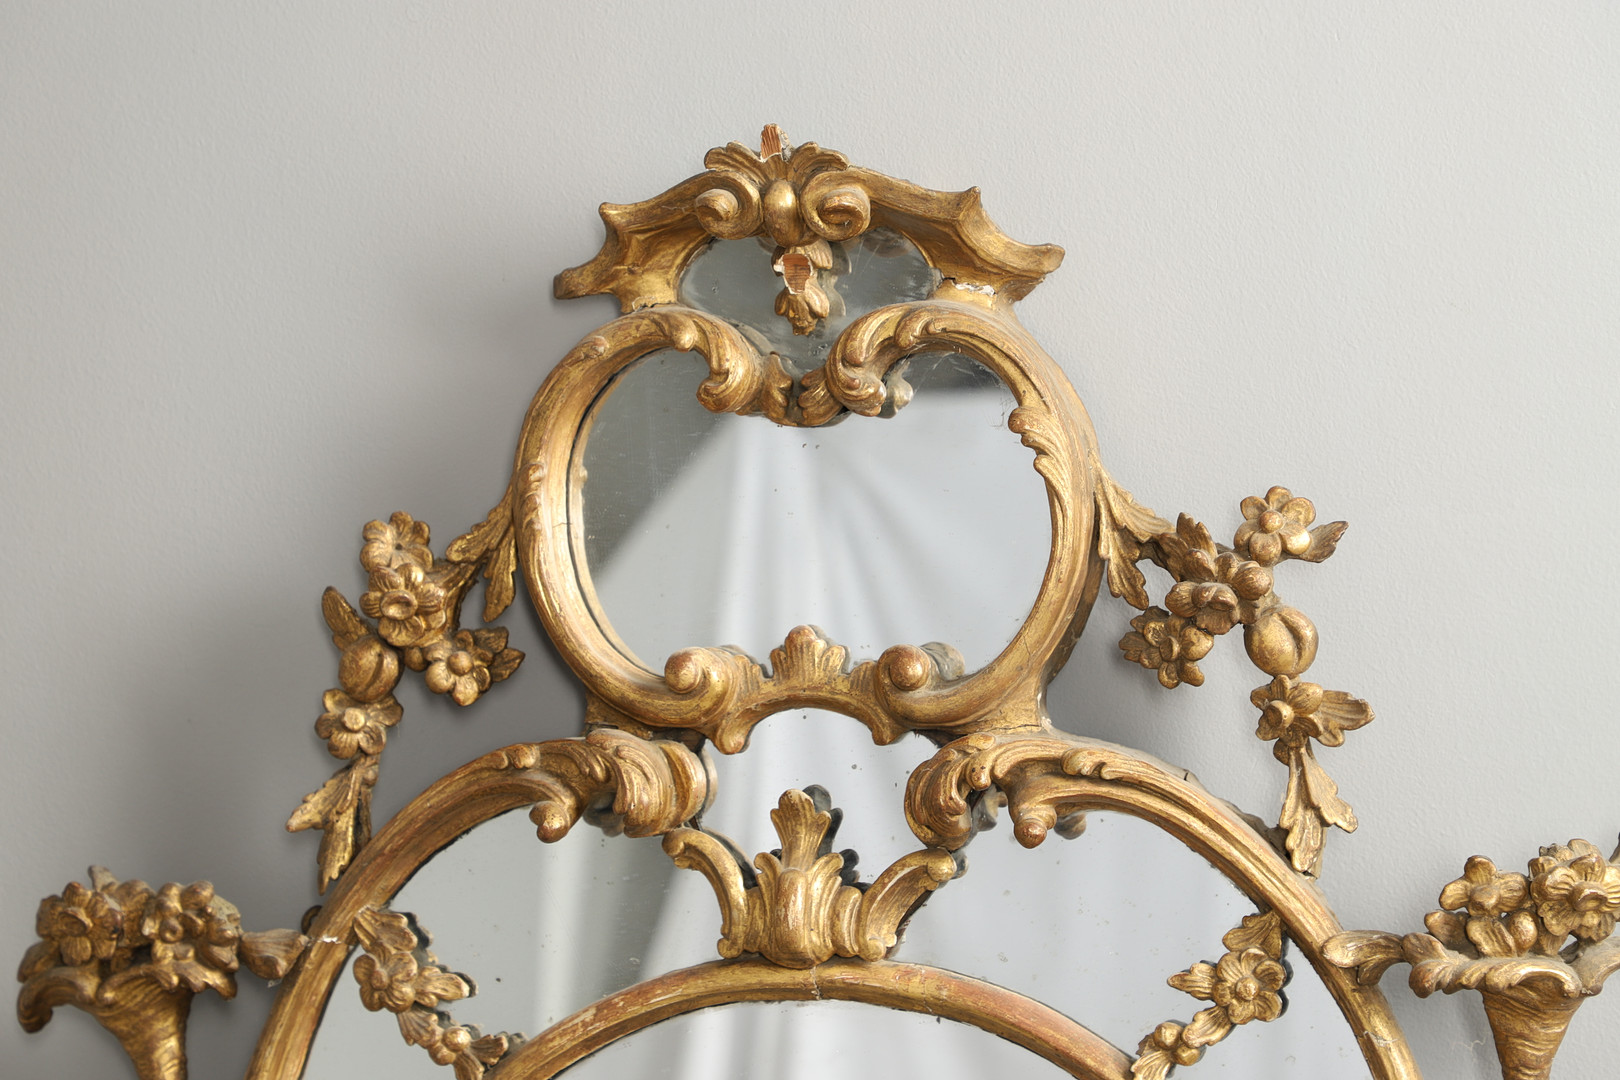 A LATE 18TH CENTURY GILTWOOD SECTIONAL WALL MIRROR. - Image 2 of 12